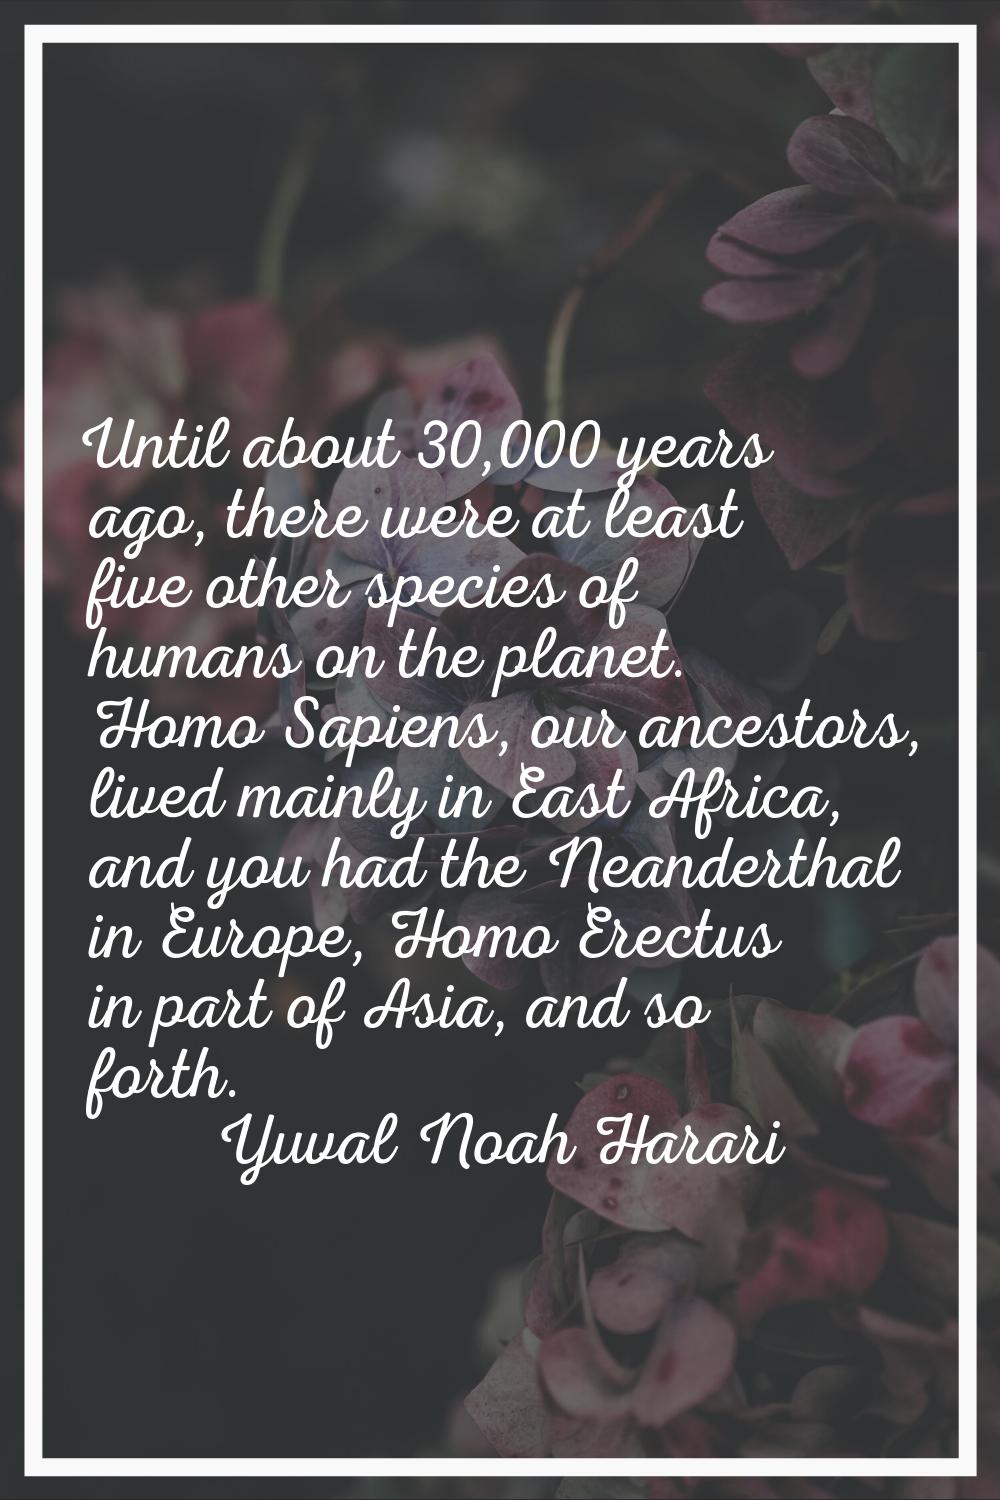 Until about 30,000 years ago, there were at least five other species of humans on the planet. Homo 